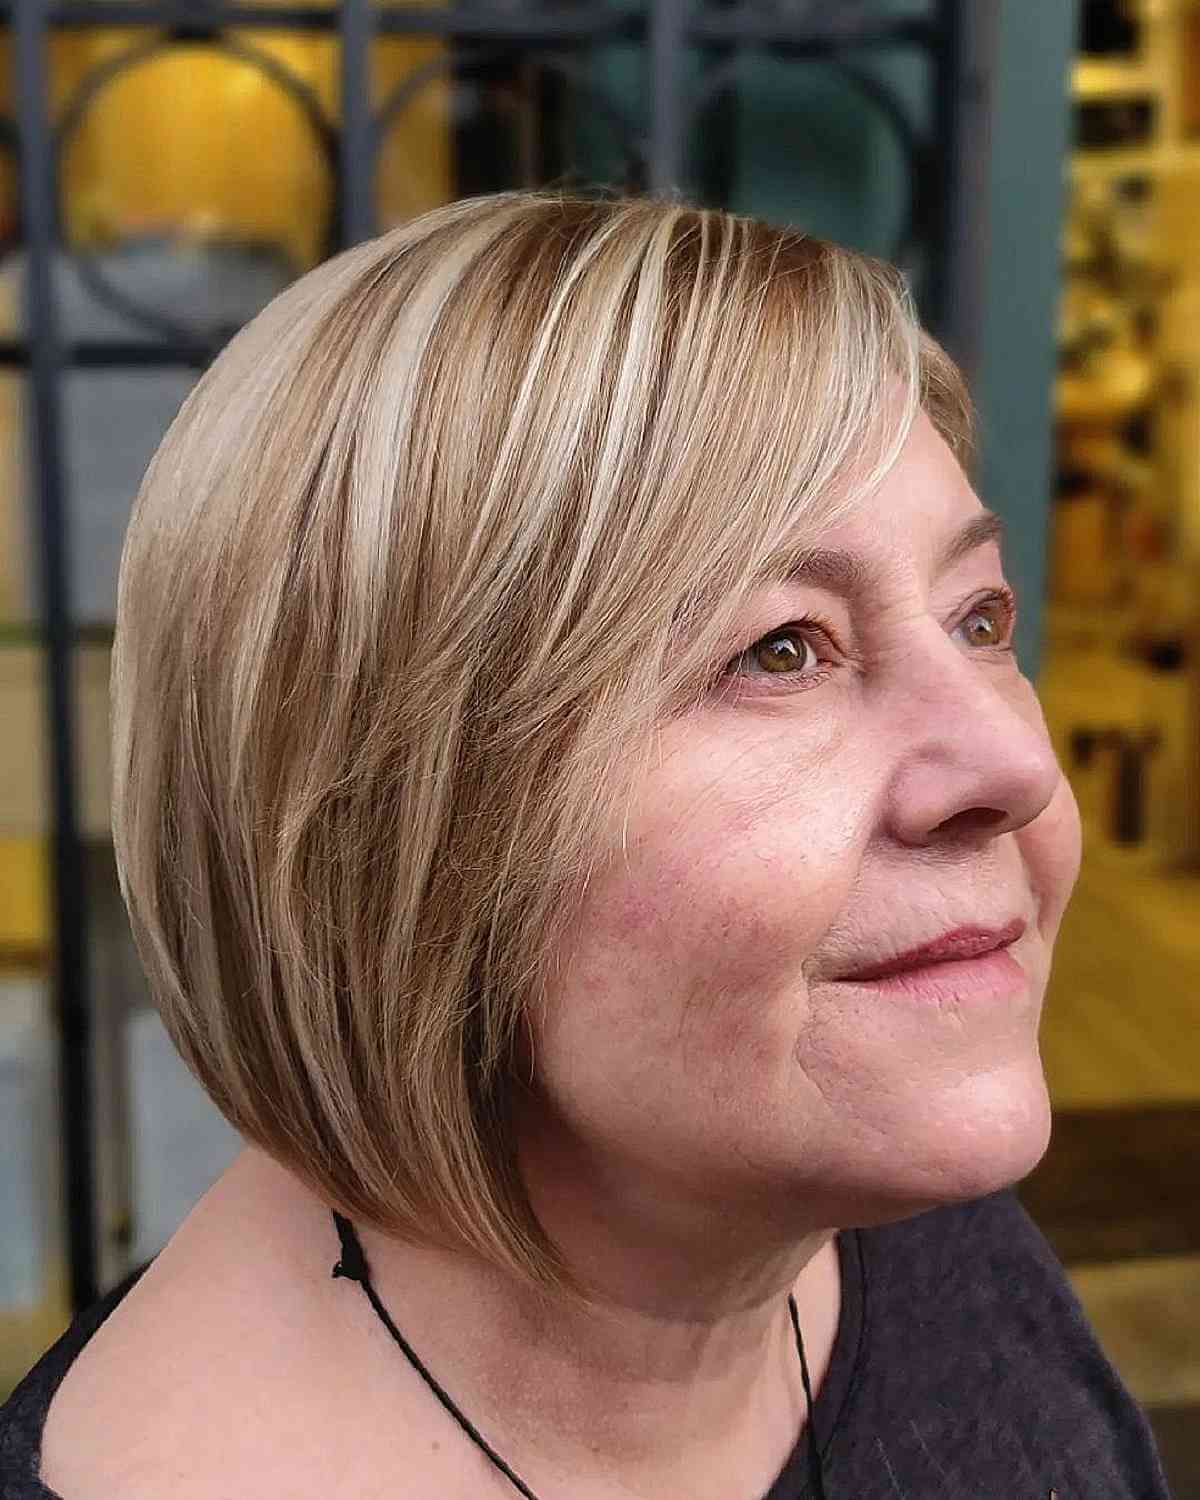 Short Bob with Highlights and Lowlights